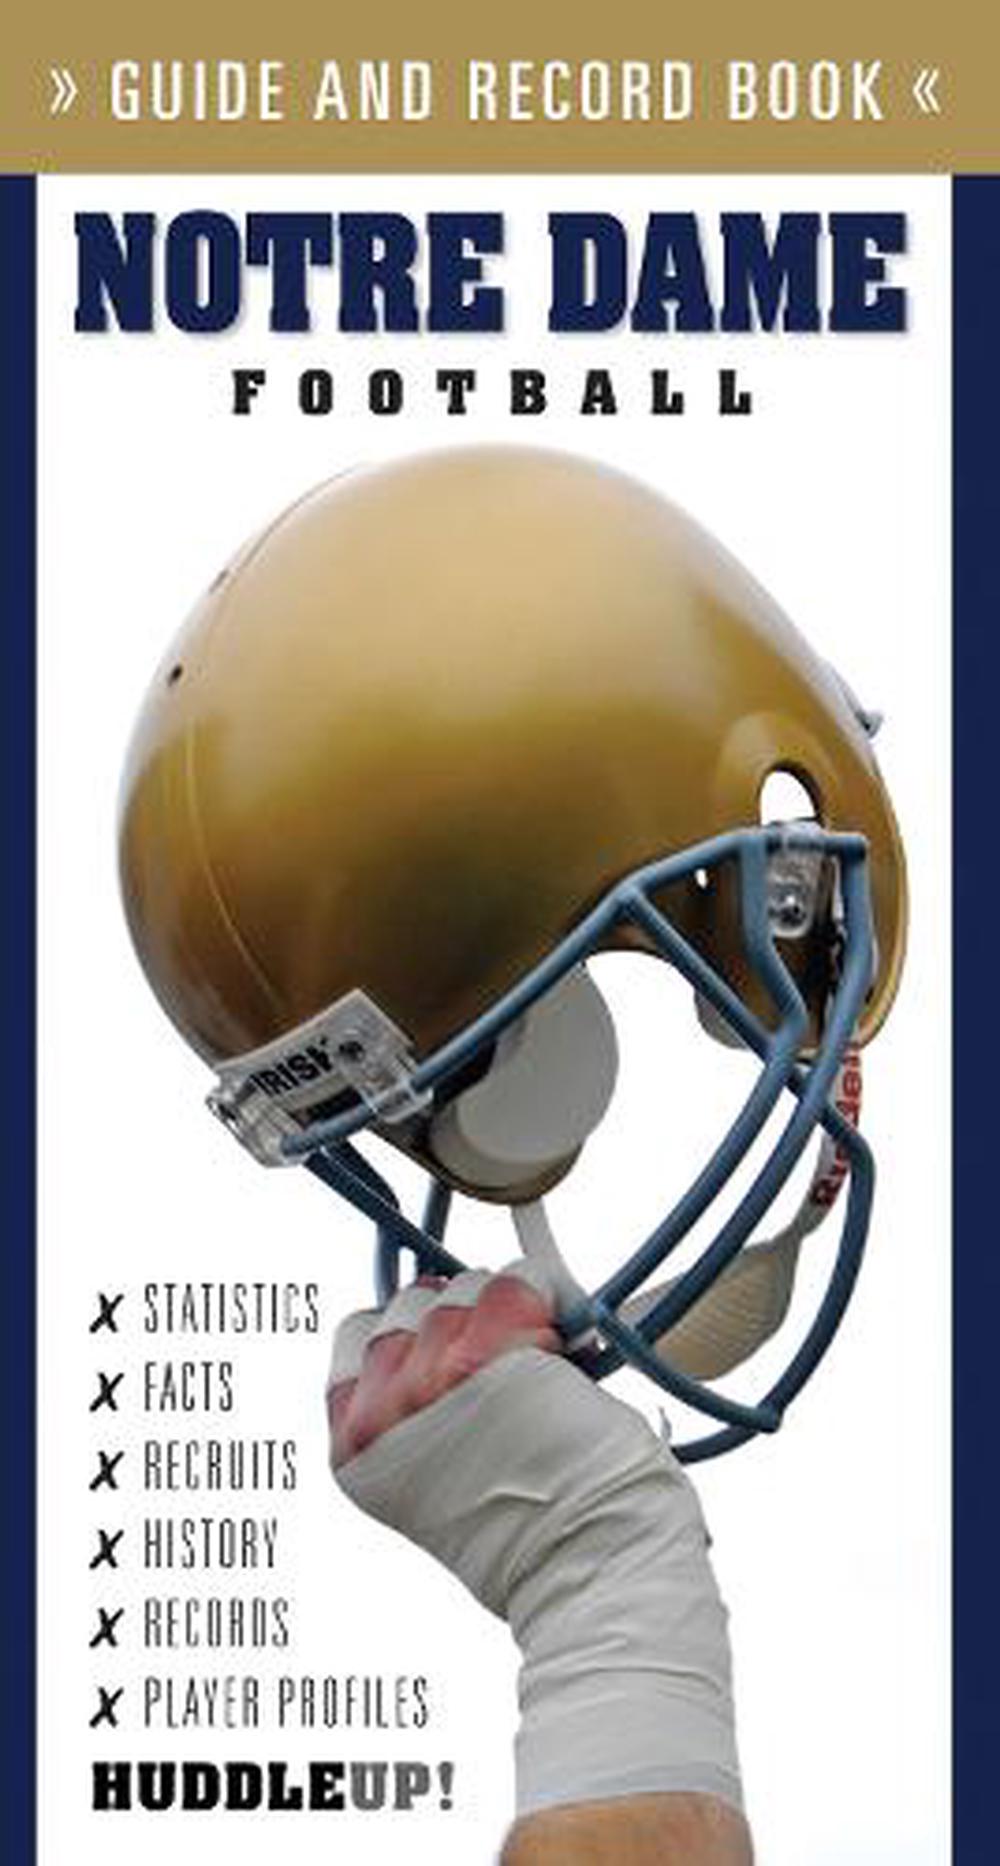 Notre Dame Football Guide and Record Book Guide & Record Book by